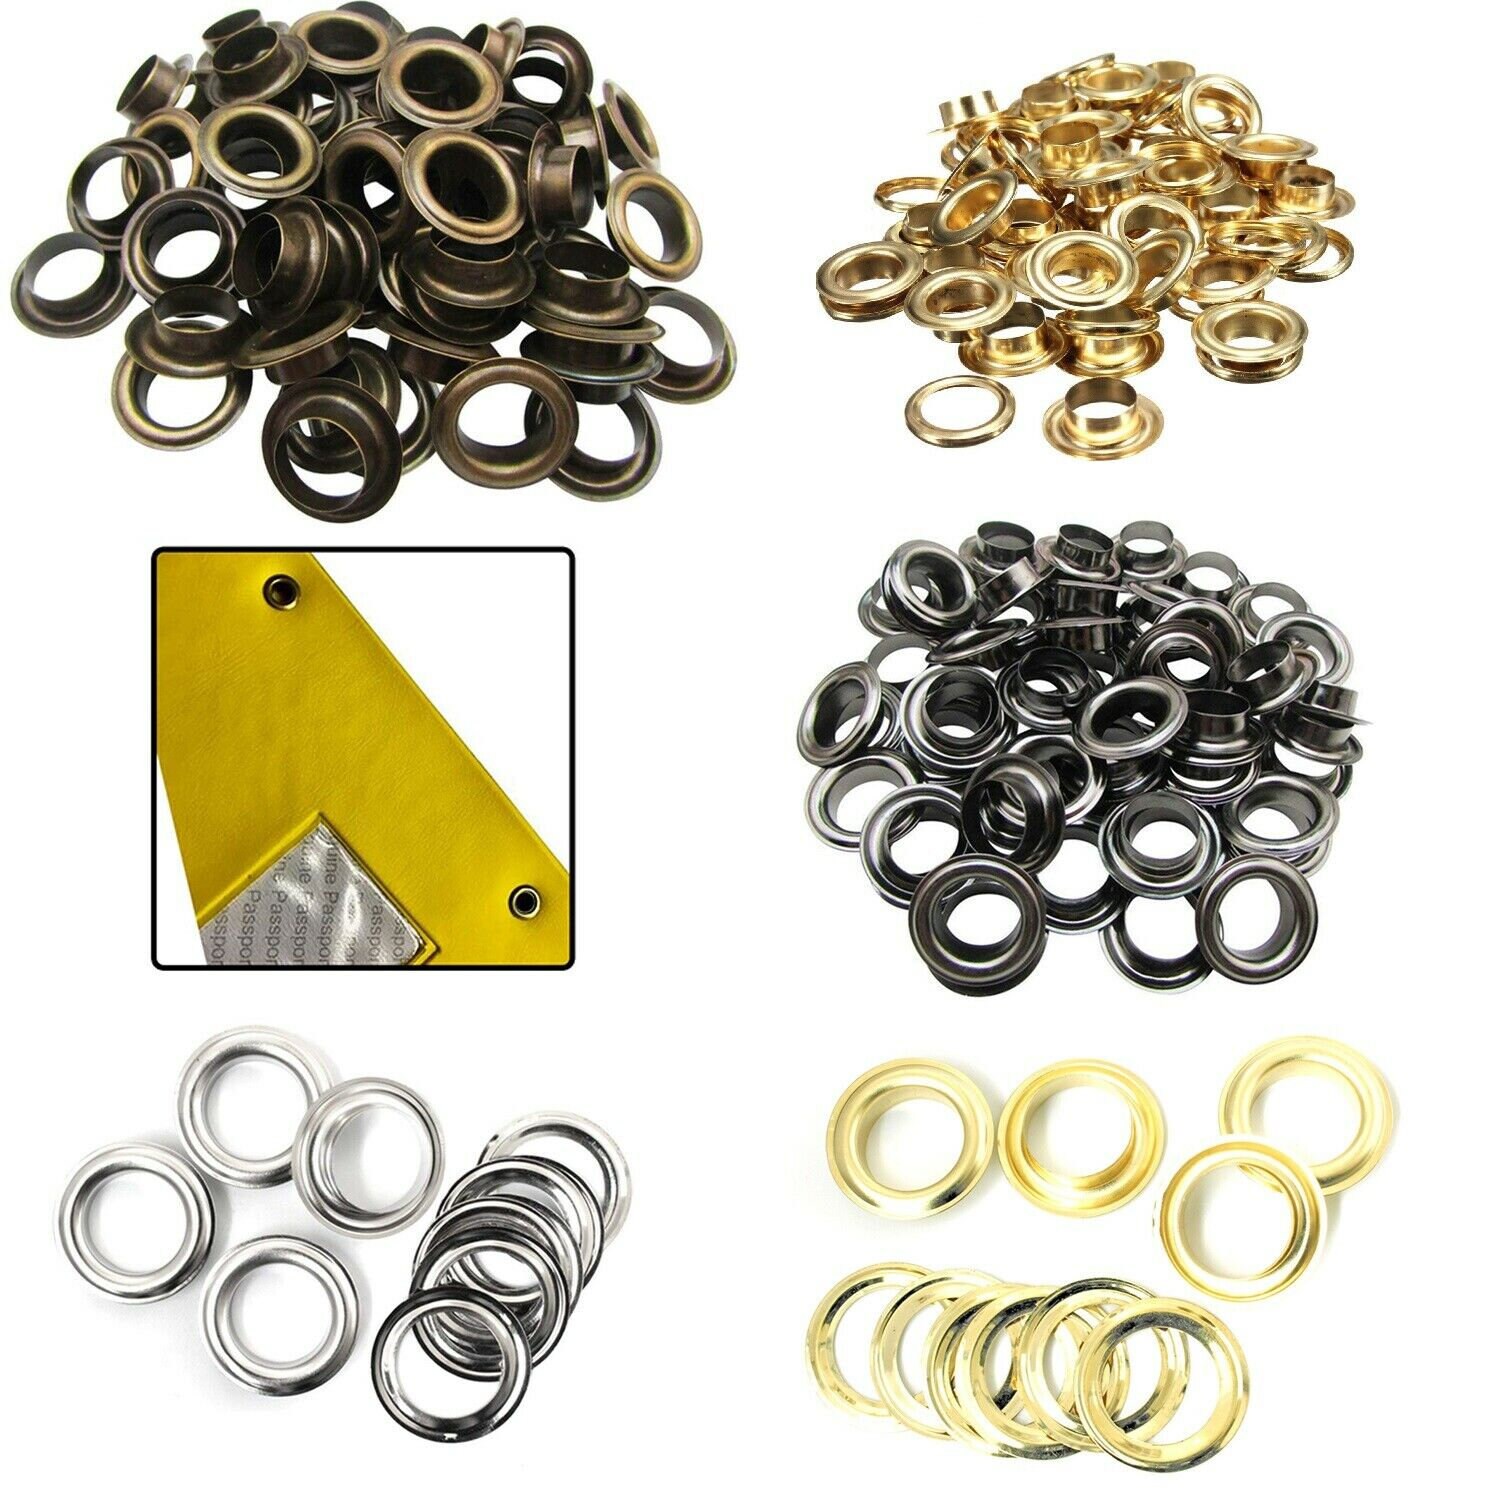 20Mm Grommets Eyelets and Washers Rust Proof for Fabric Curtains Leather  Tarpaulin Arts & Craft